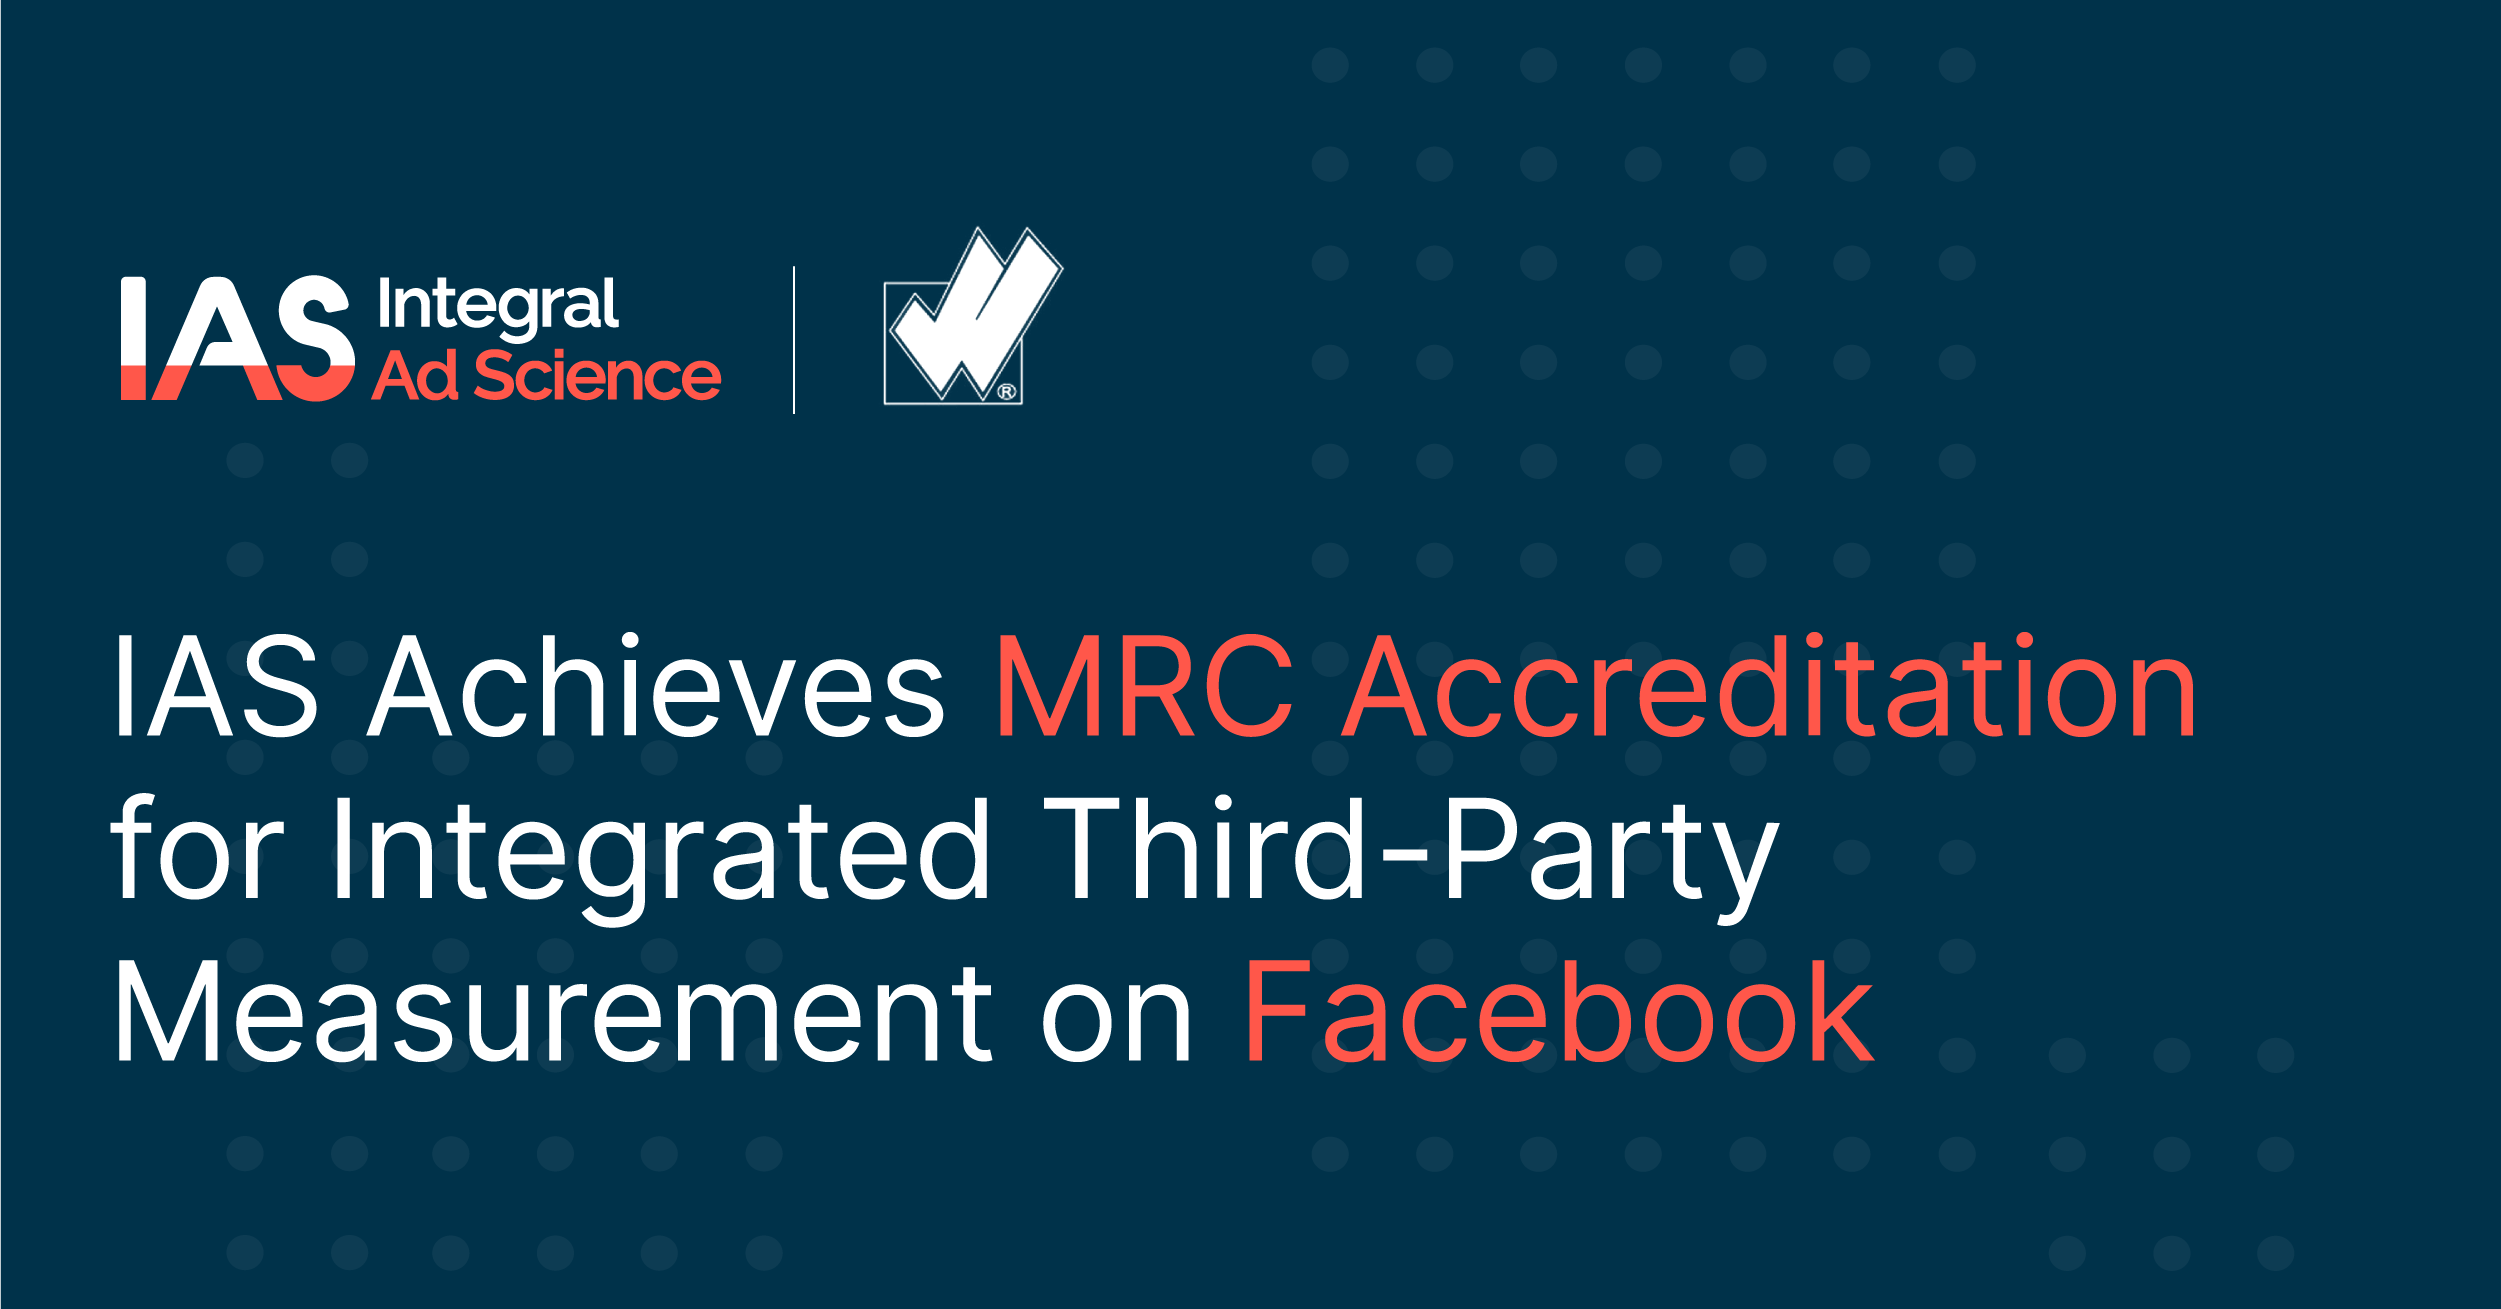 IAS Achieves MRC Accreditation for Integrated Third-Party Measurement on Facebook